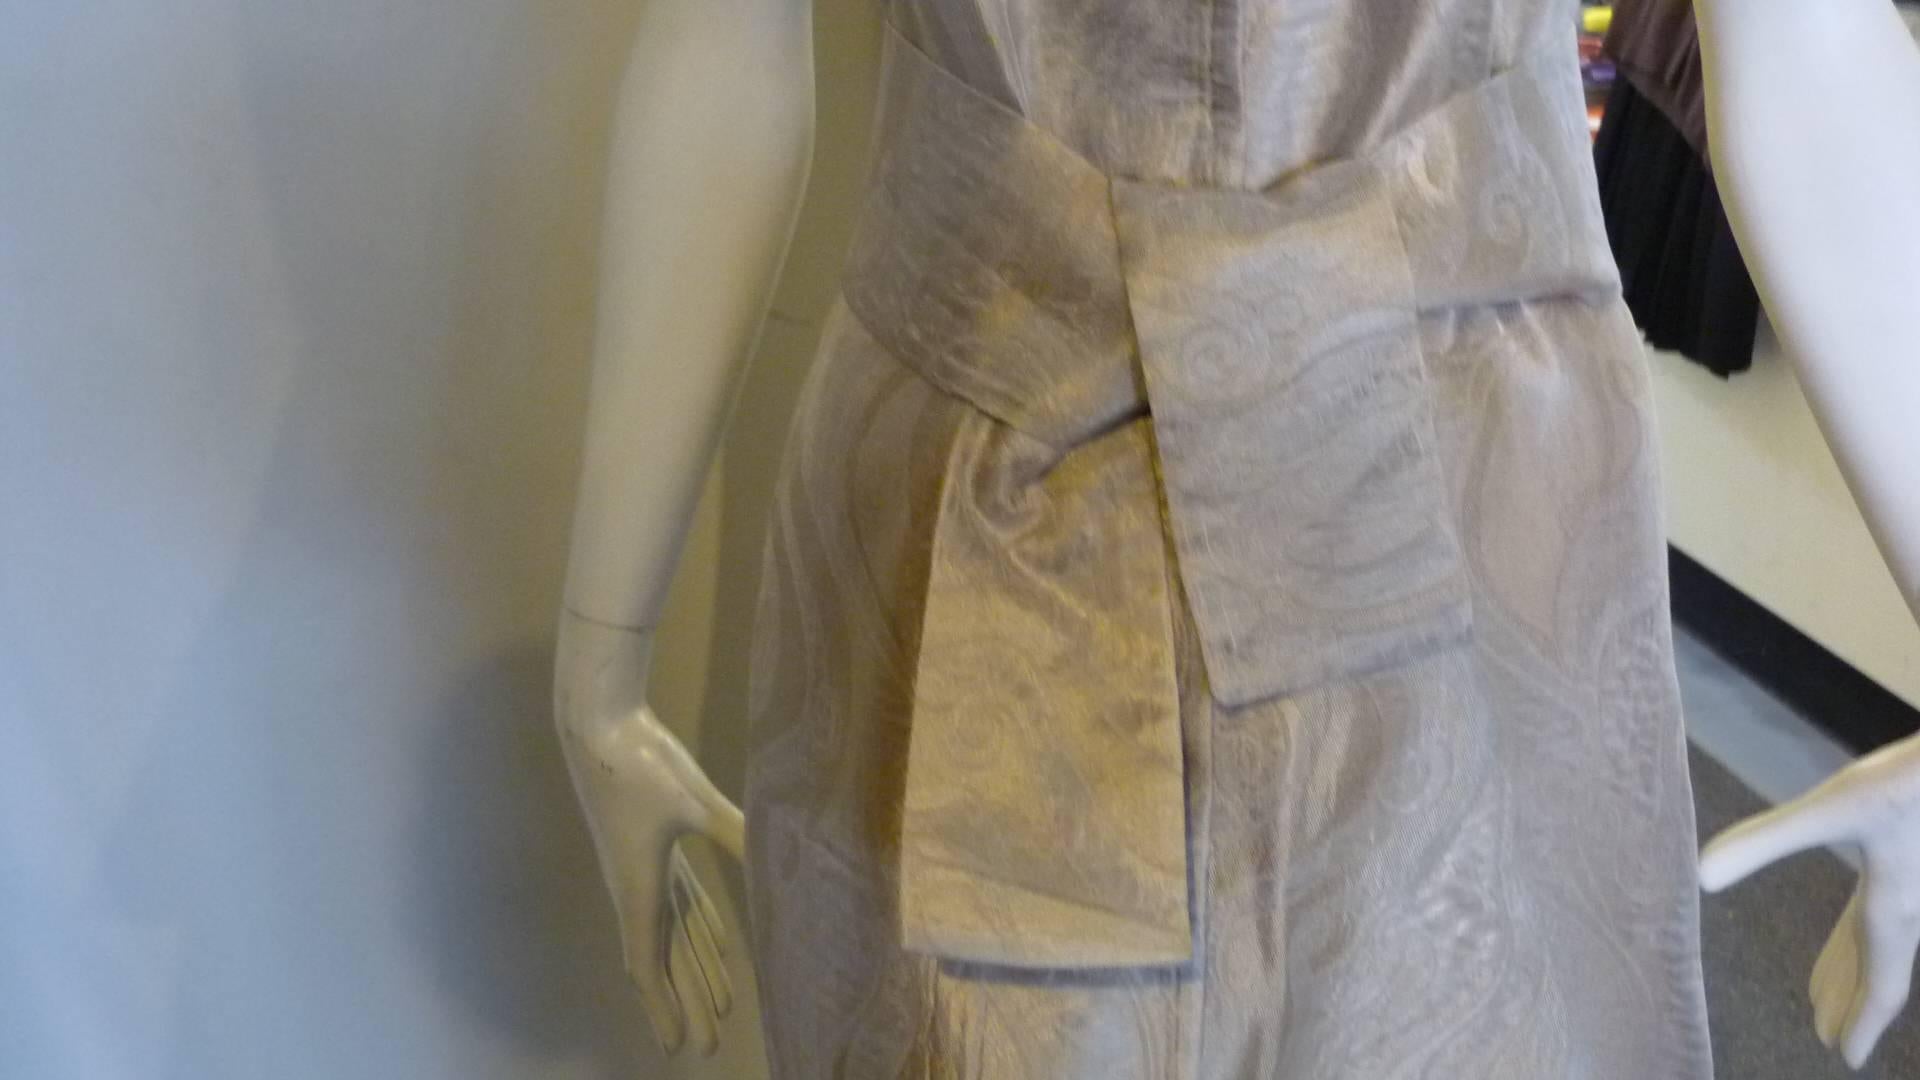 2008 S/S Alberta Ferretti Metallic Gold Patterned Dress (44 Itl) In Excellent Condition For Sale In Port Hope, ON